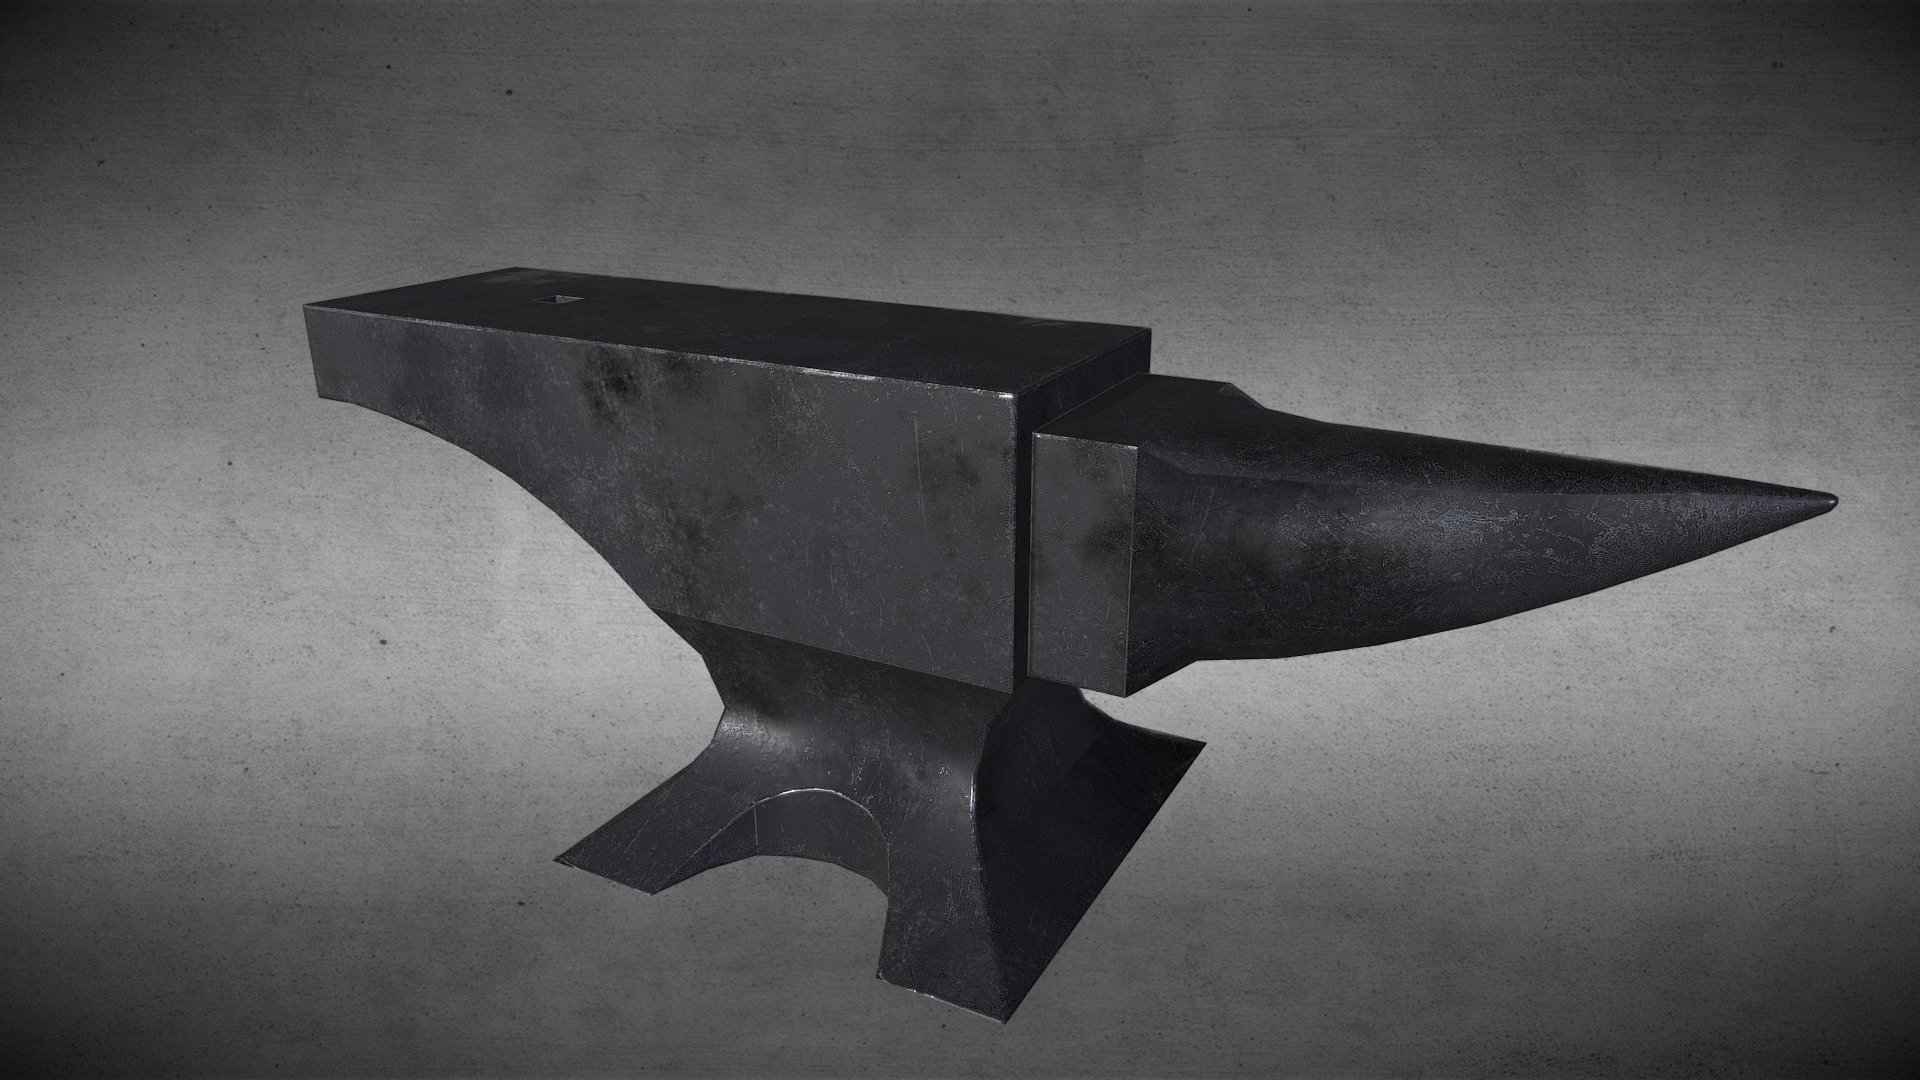 ANVIL for apple download free